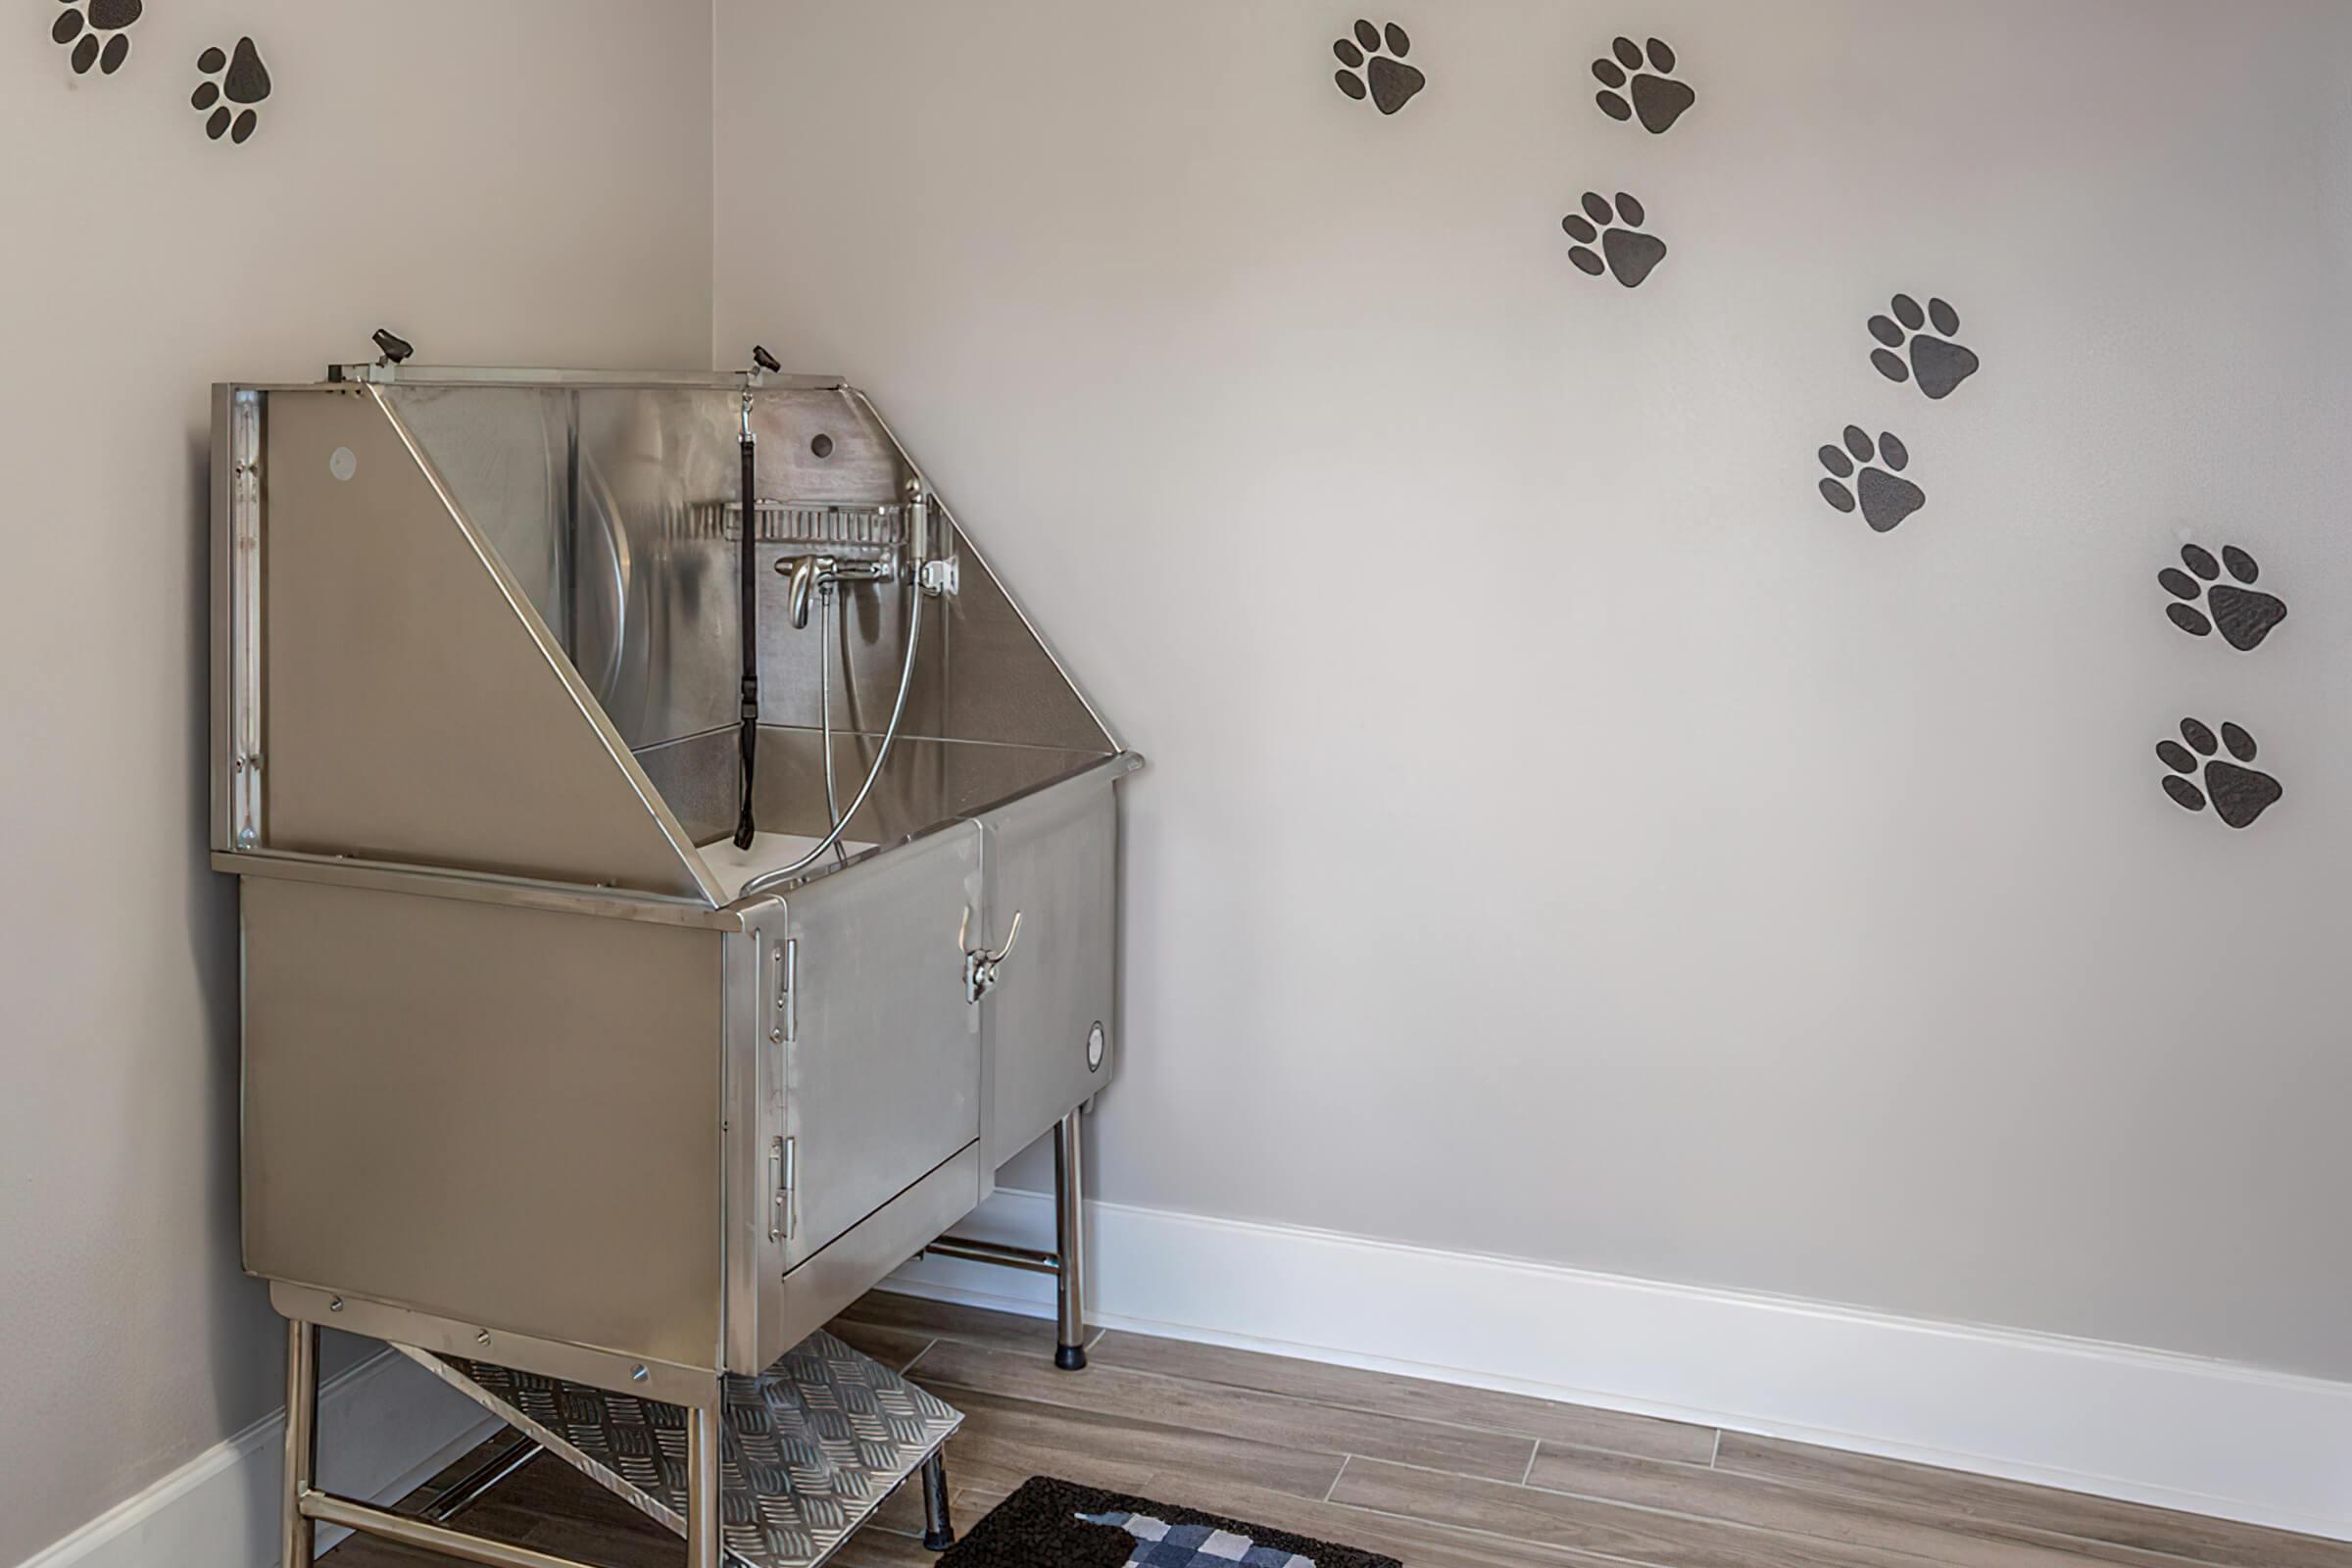 GIVE YOUR PET A TREAT AT OUR PET SPA